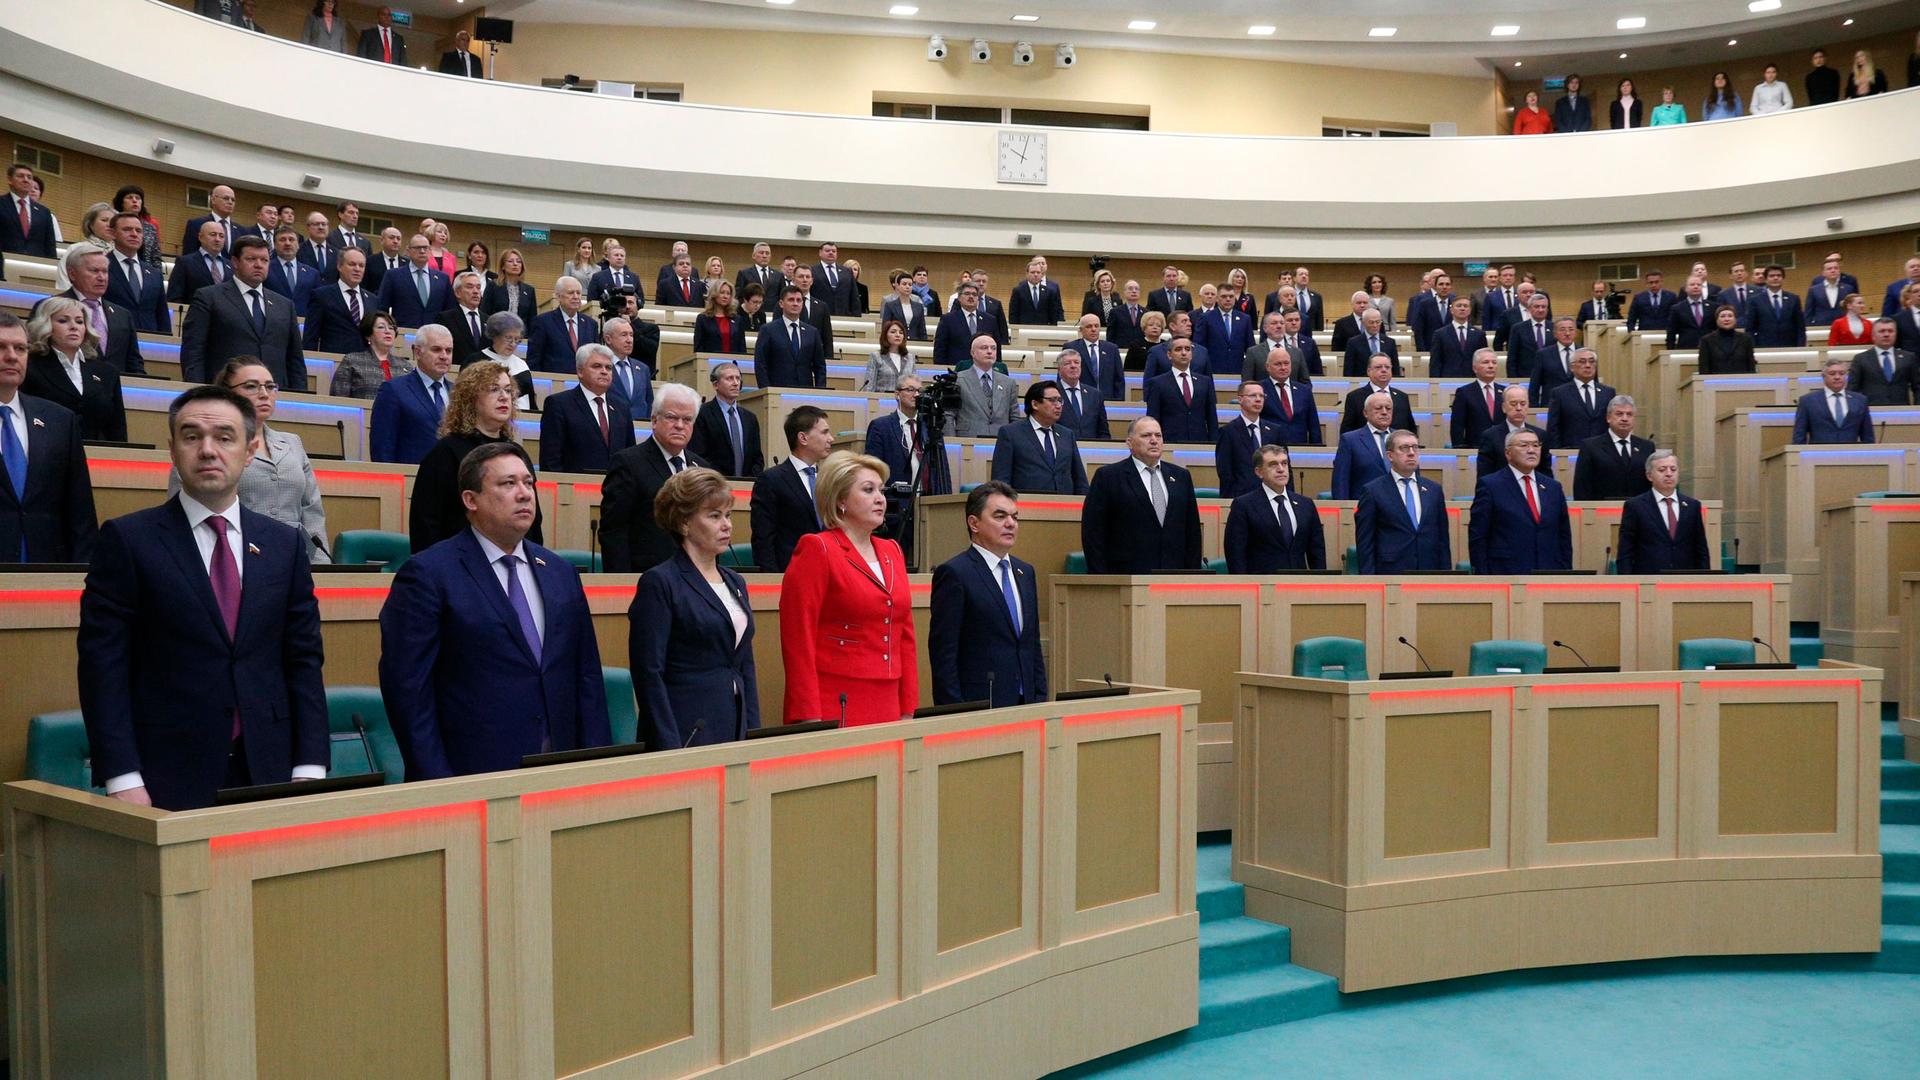 In this photo provided by The Federation Council of The Federal Assembly of The Russian Federation Press Service, lawmakers of Federation Council of the Federal Assembly of the Russian Federation listen to the national anthem at a session in Moscow, Russi